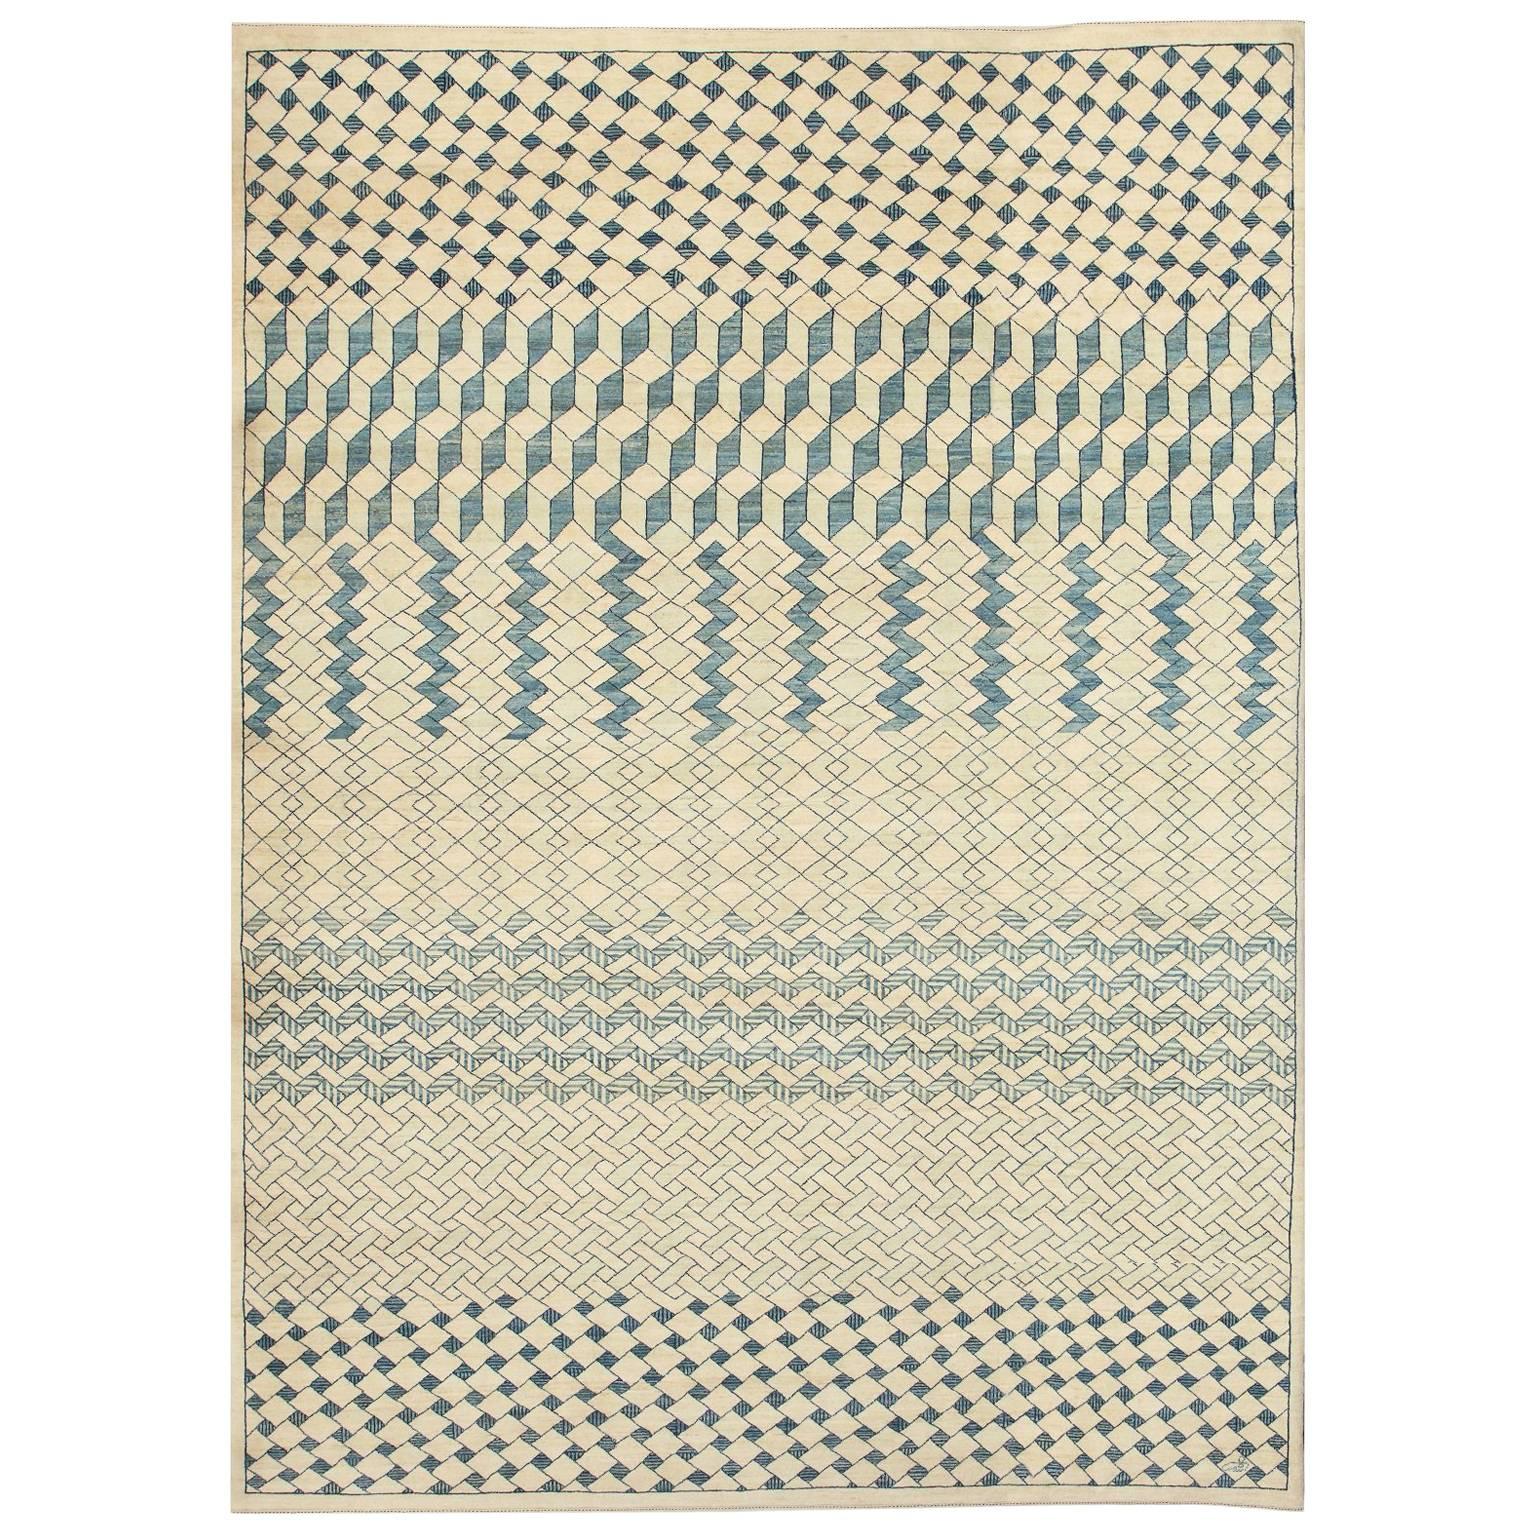 Orley Shabahang Signature "Lattice" Carpet in Handspun Wool and Vegetable Dyes